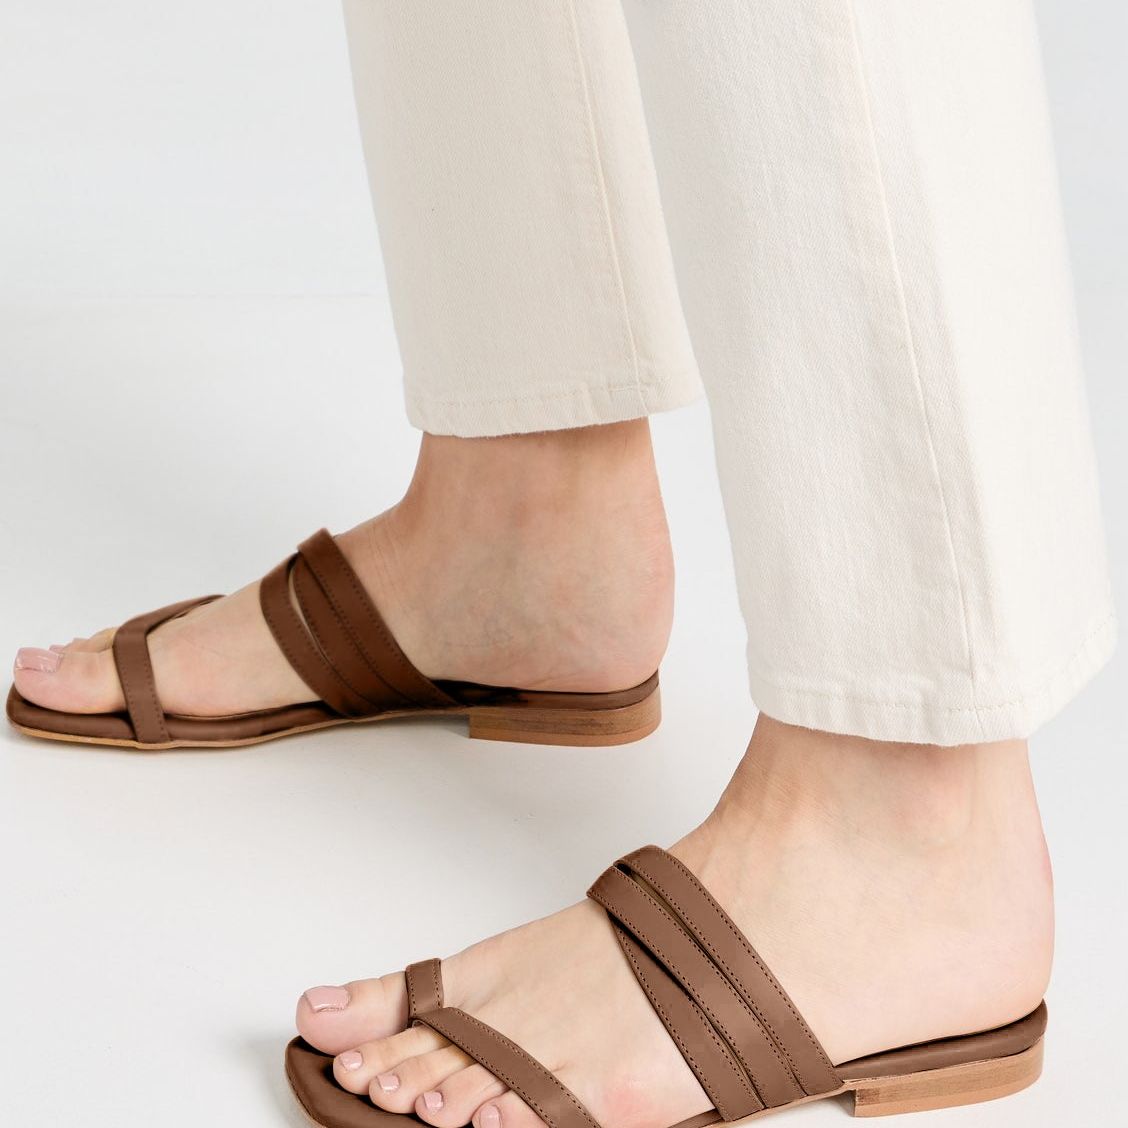 Manly Sandals